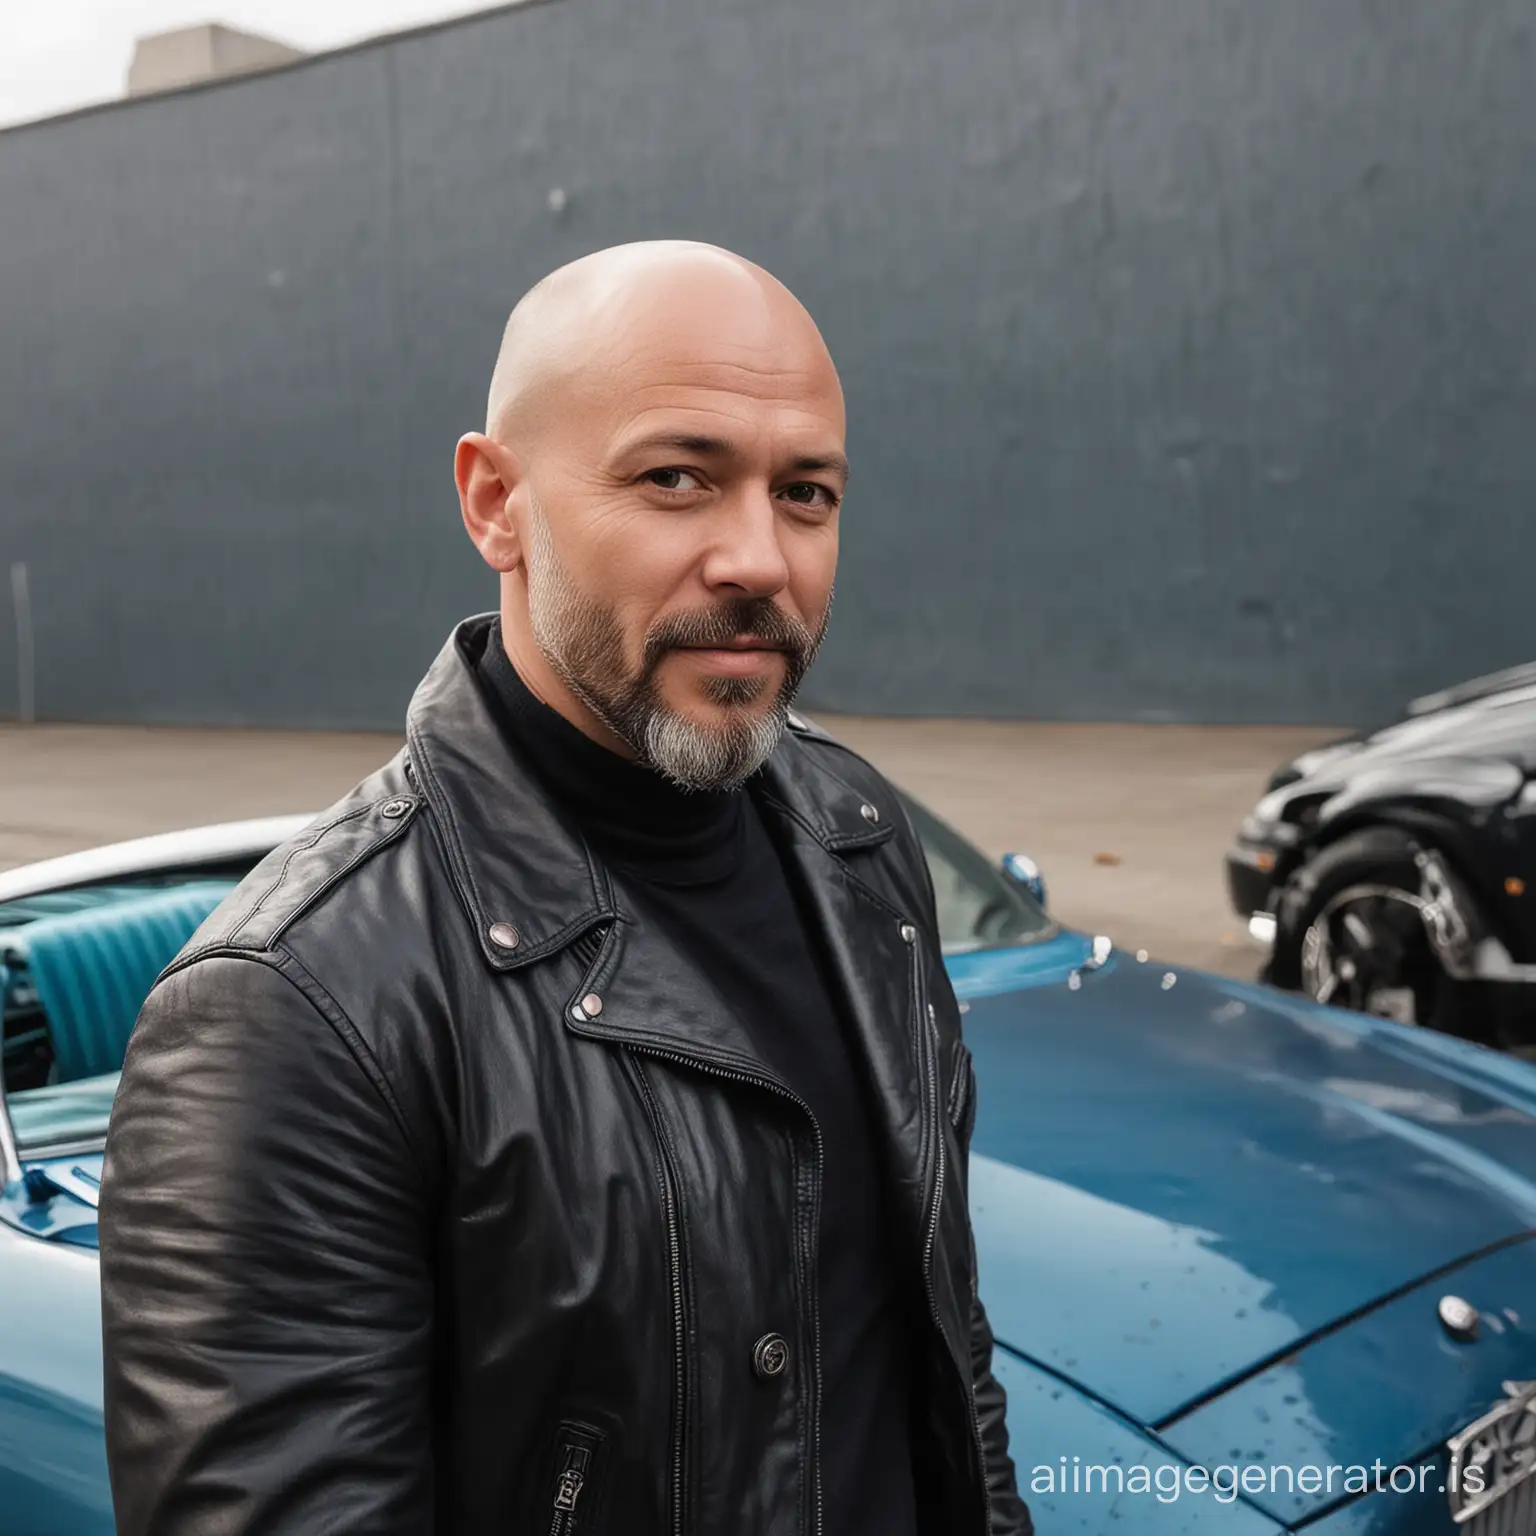 Man with small beard and bald head with leather jacket beside a blue car